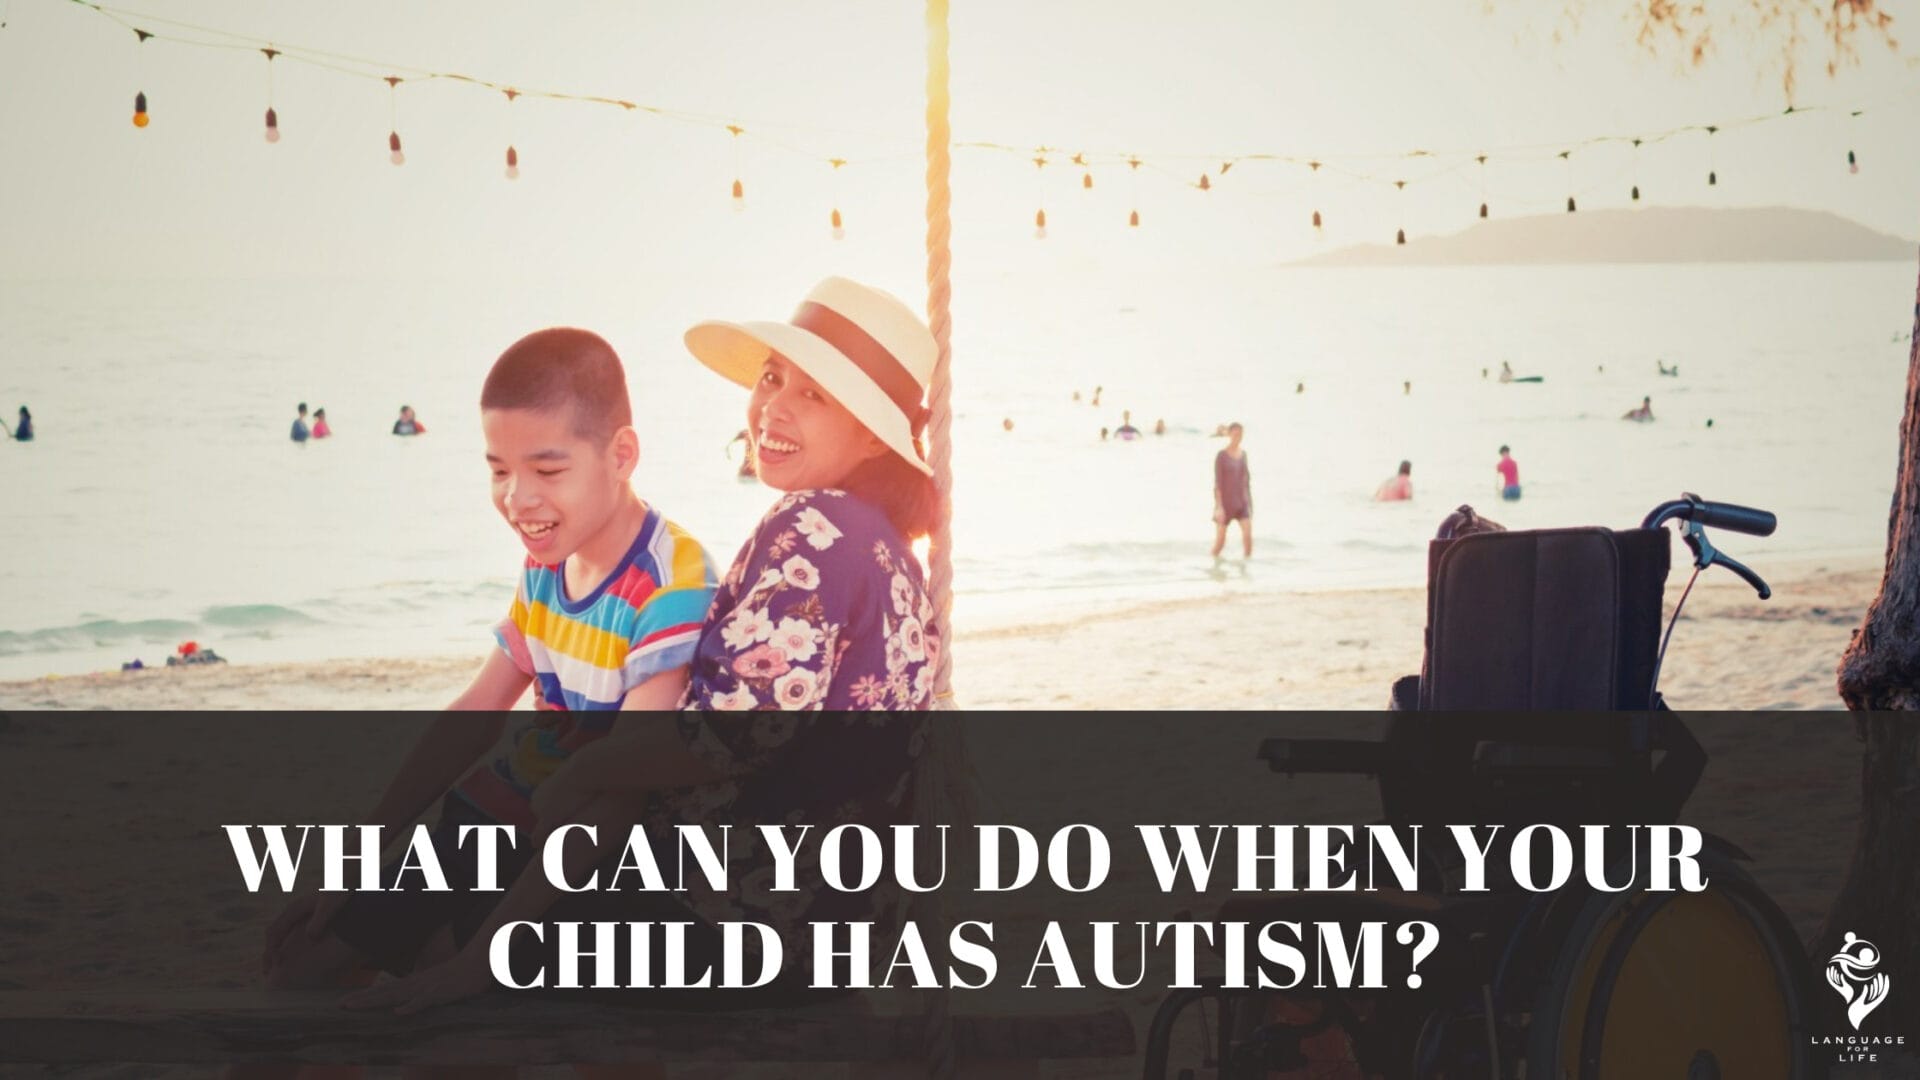 What can you do when your child has autism